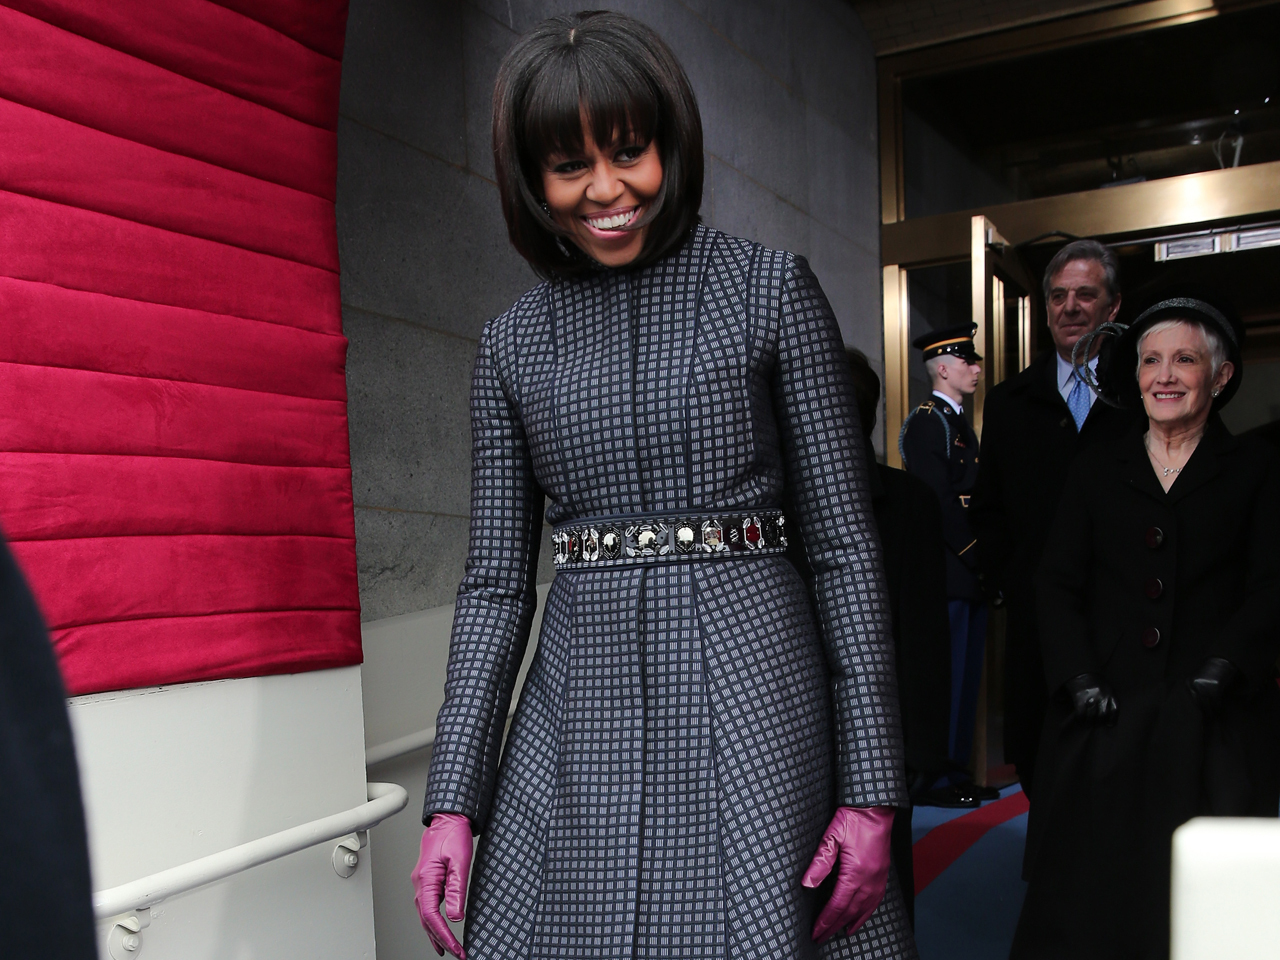 Thom Browne on Michelle Obama's inauguration outfit - CBS News